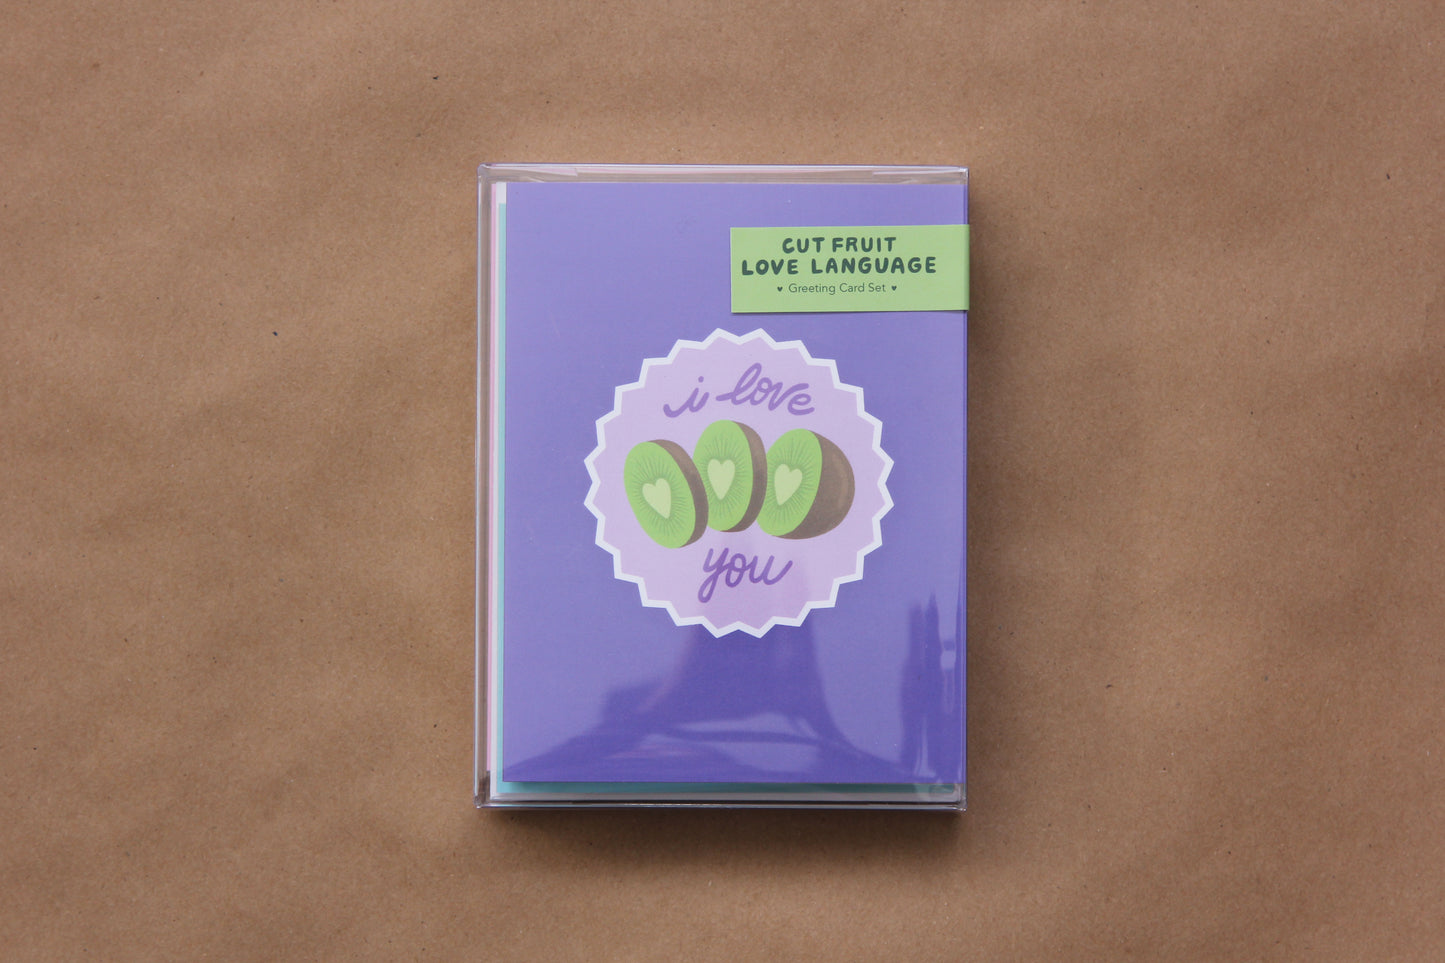 A photo of a clear box of the Cut Fruit Love Language Greeting Card Set.